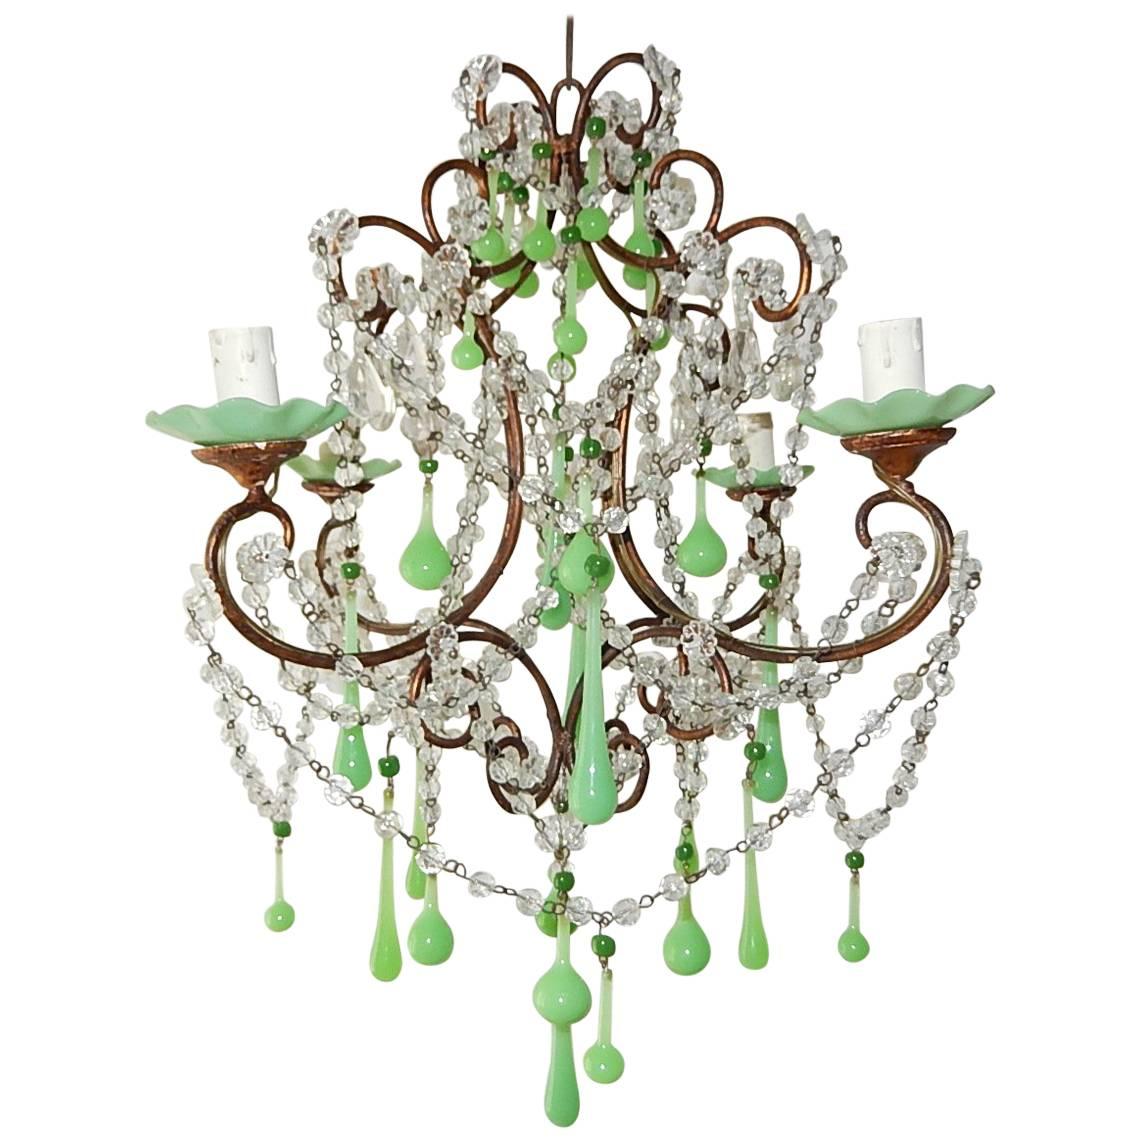 1920 French Green Opaline Bobeches, Beads and Drops Chandelier